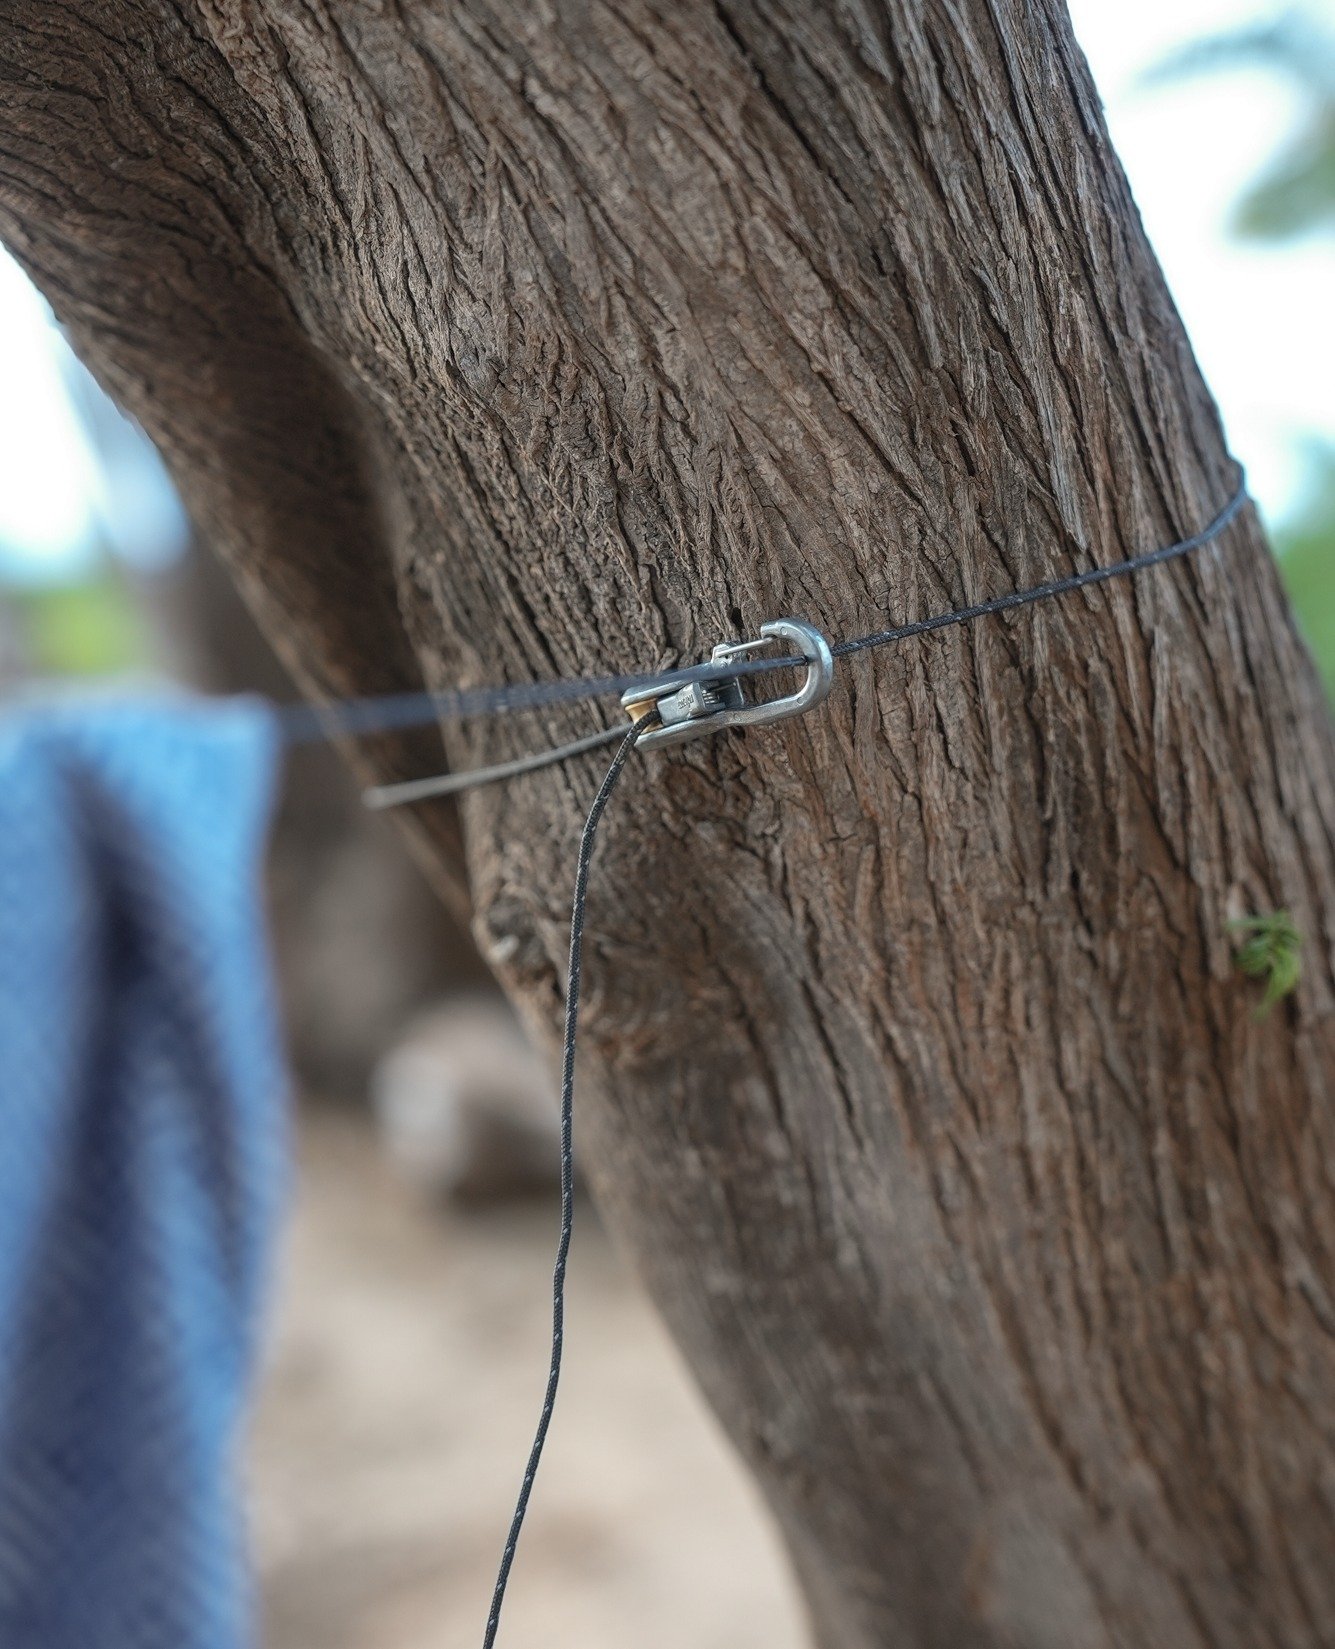 Roperoller 🤝 Clothesline⁠
⁠
The simplest tool with unending uses &mdash; no matter where the road takes you.⁠
⁠
#roperoller #whatcanyoucam #getoutside #overlanding #riverrafting